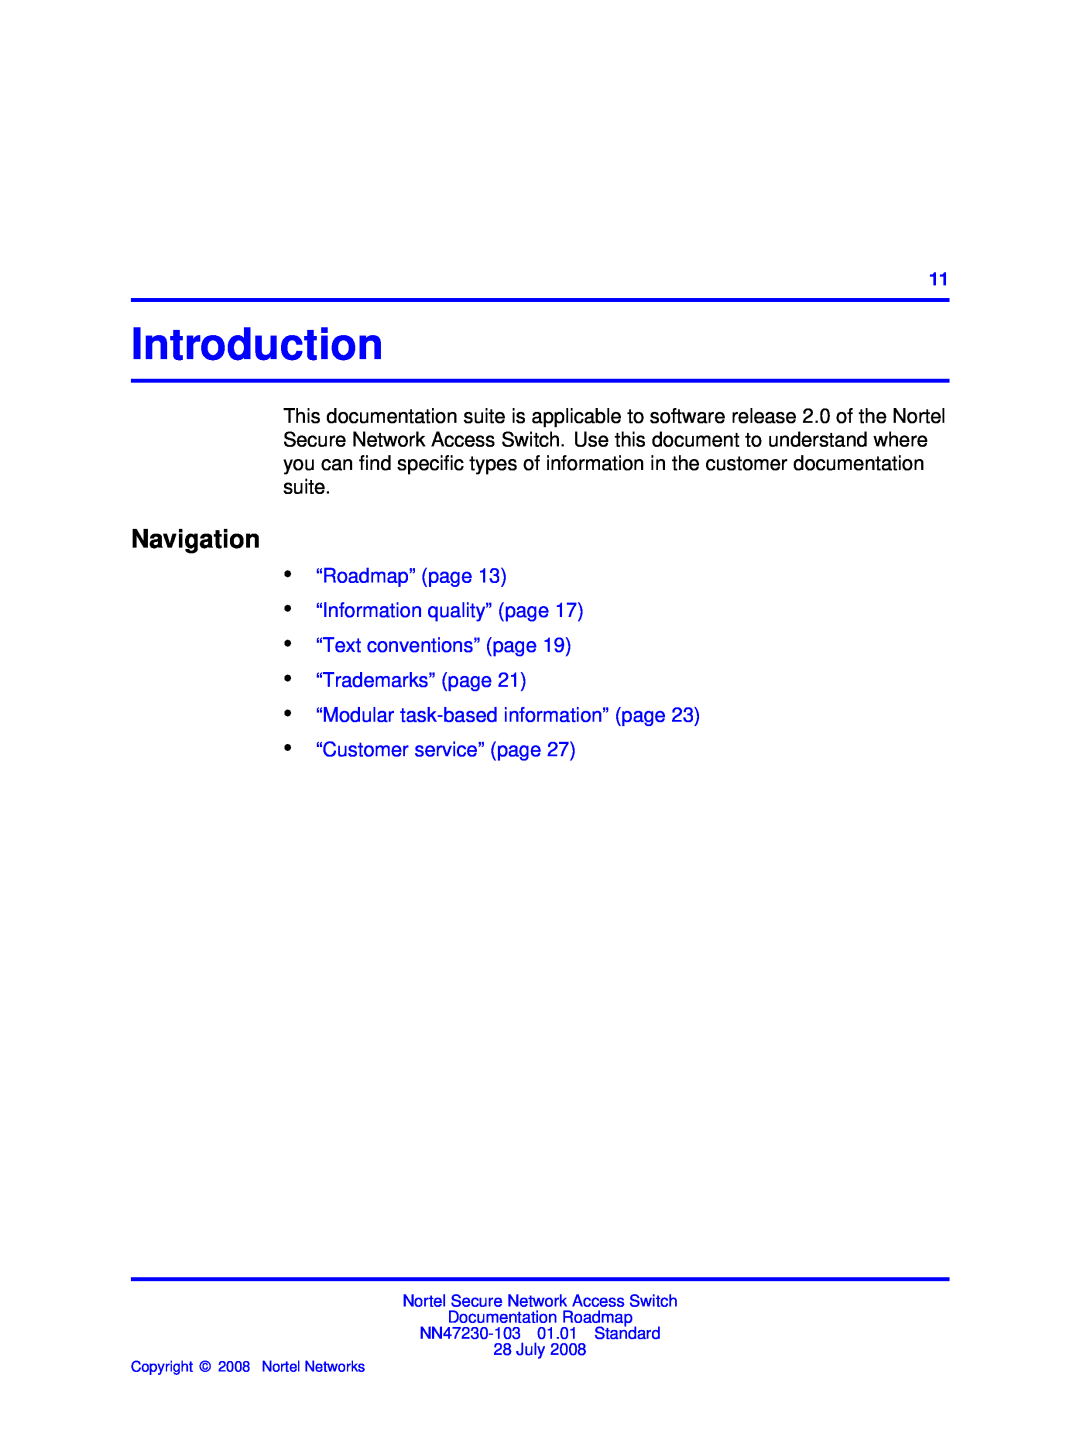 Nortel Networks NN47230-103 Introduction, Navigation, “Roadmap” page “Information quality” page “Text conventions” page 